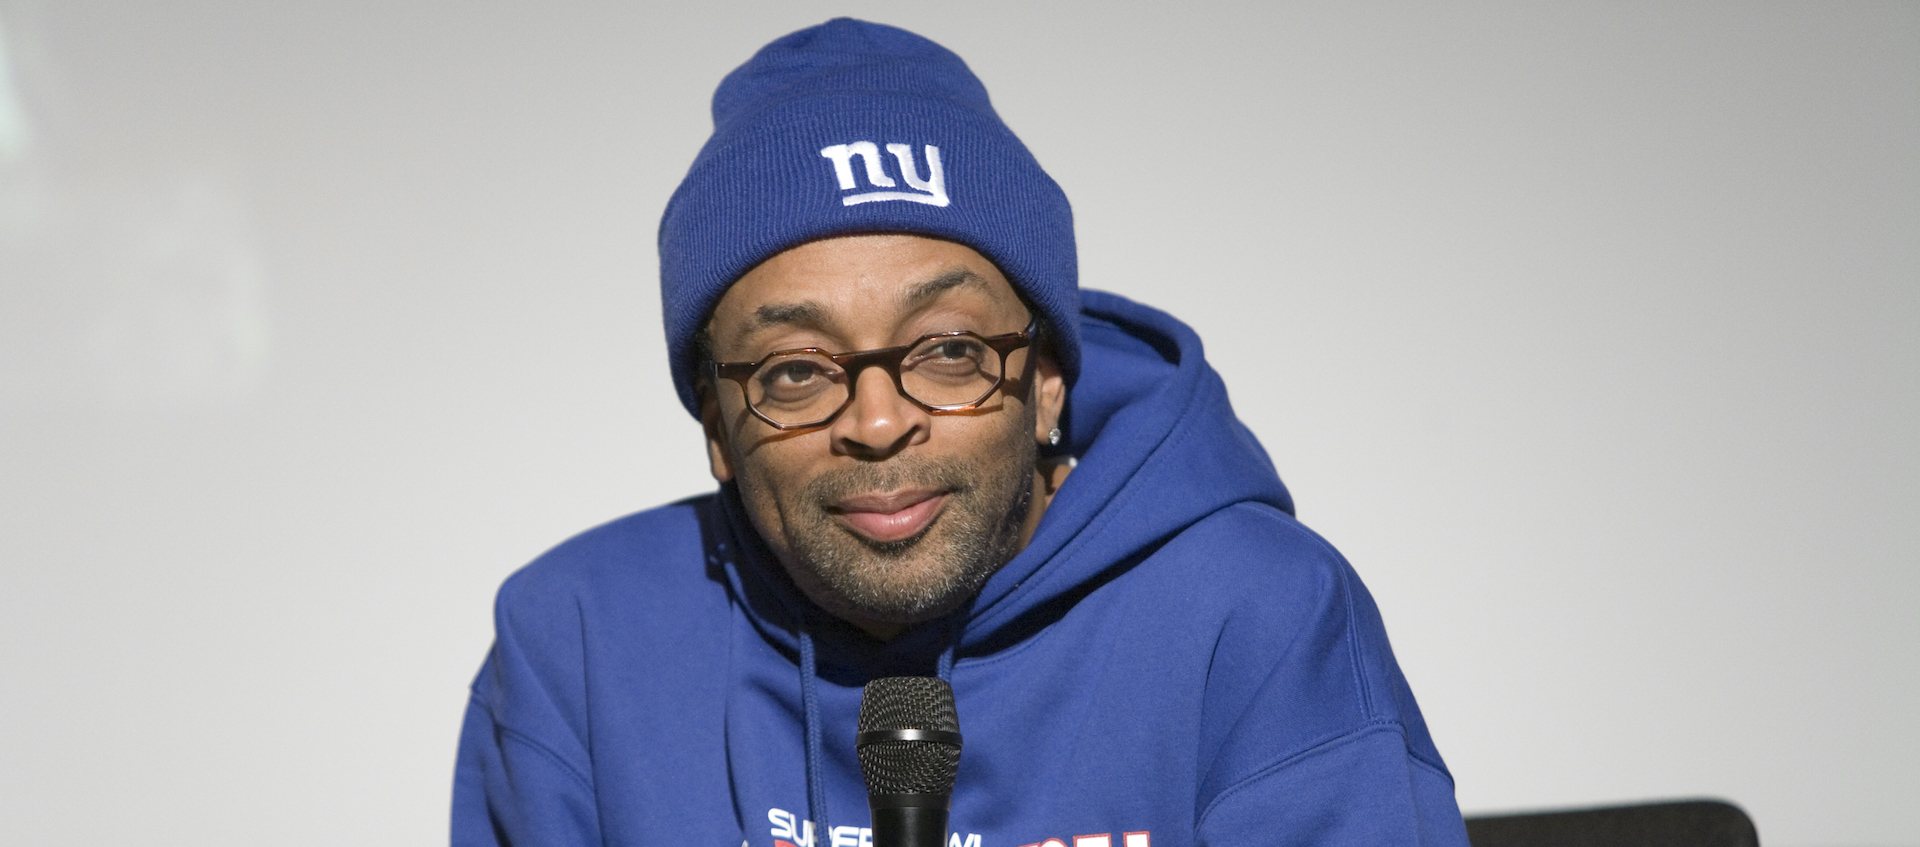 Spike Lee sits in front of a projection screen in a blue New York Knicks sweatshirt and matching knit cap